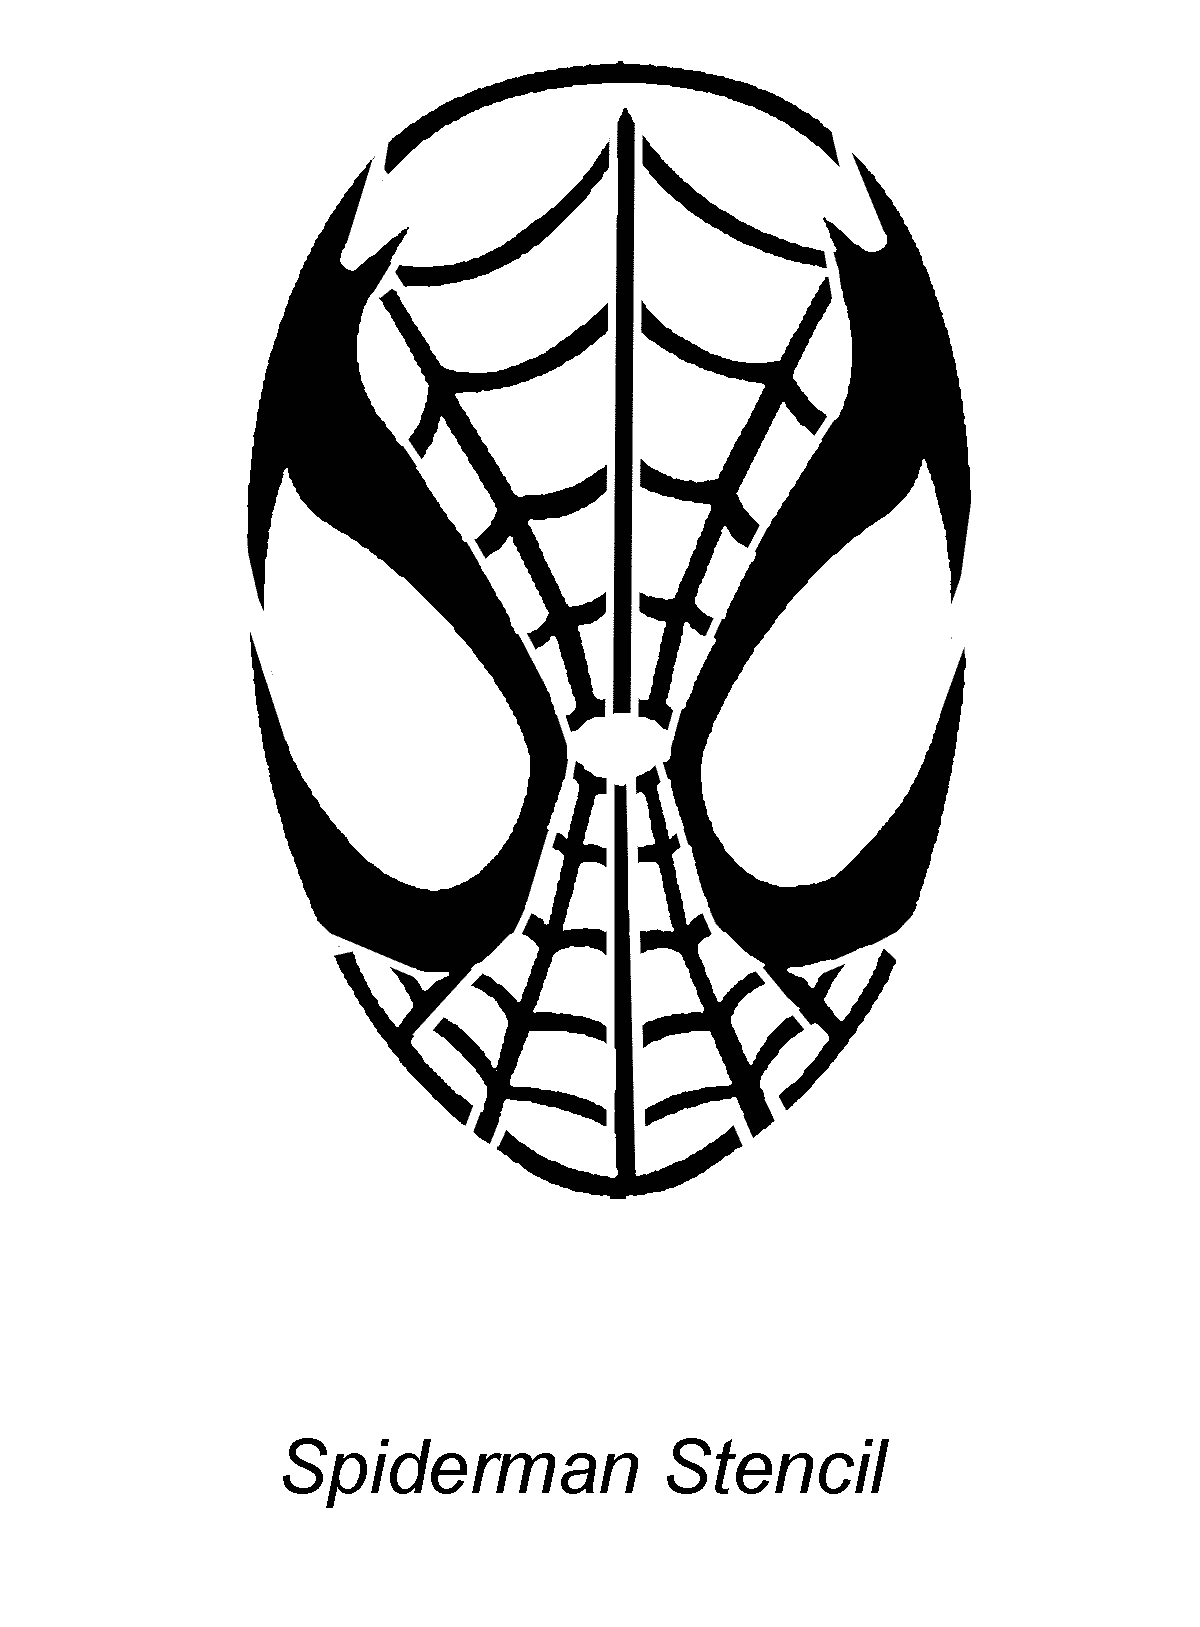 spiderman stencils - group picture, image by tag - keywordpictures.